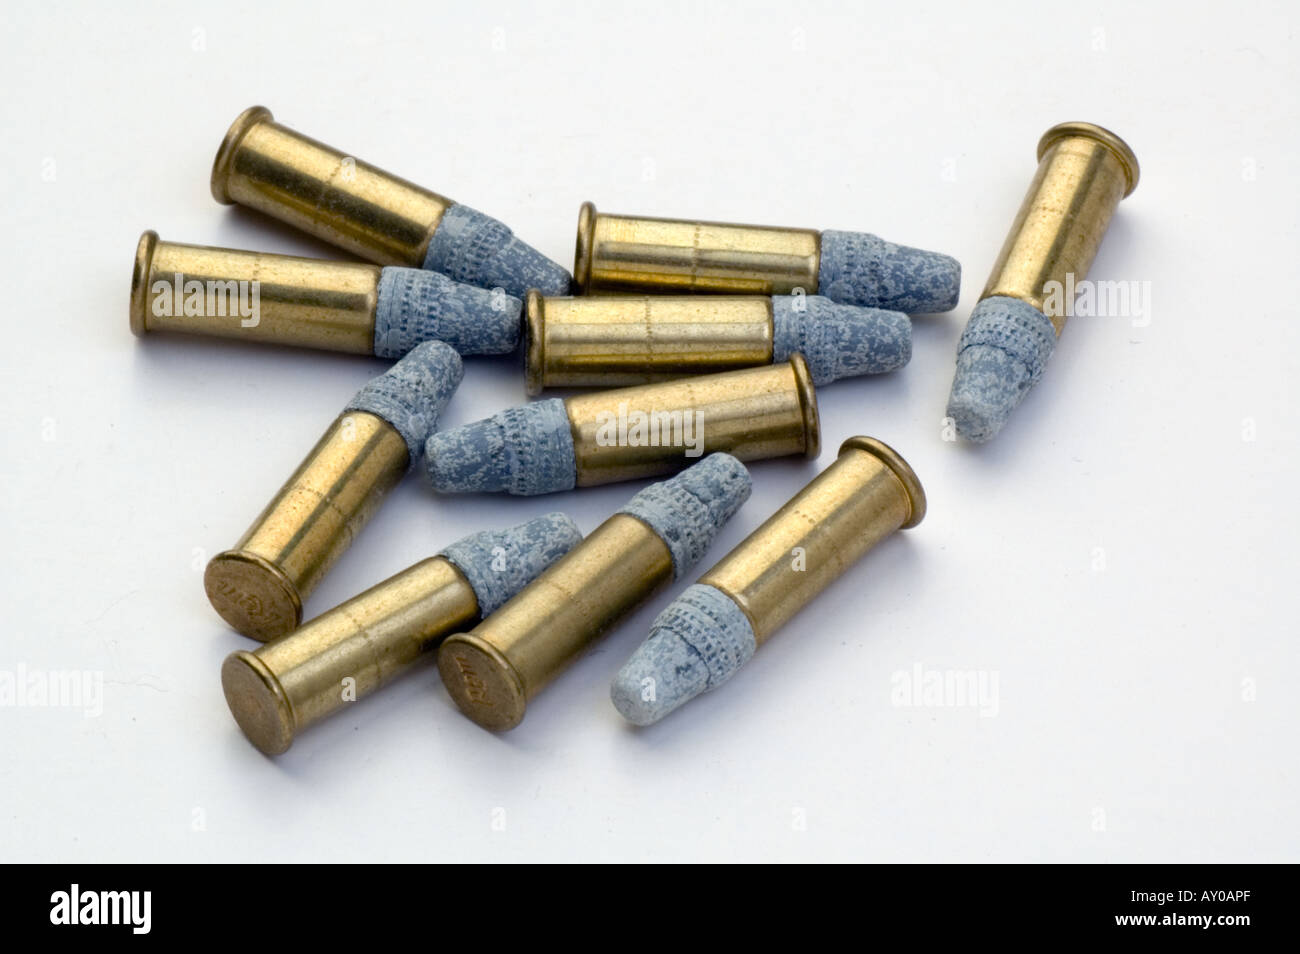 The Hazards of Old Ammo — Watch Out for Internal Corrosion! « Daily Bulletin